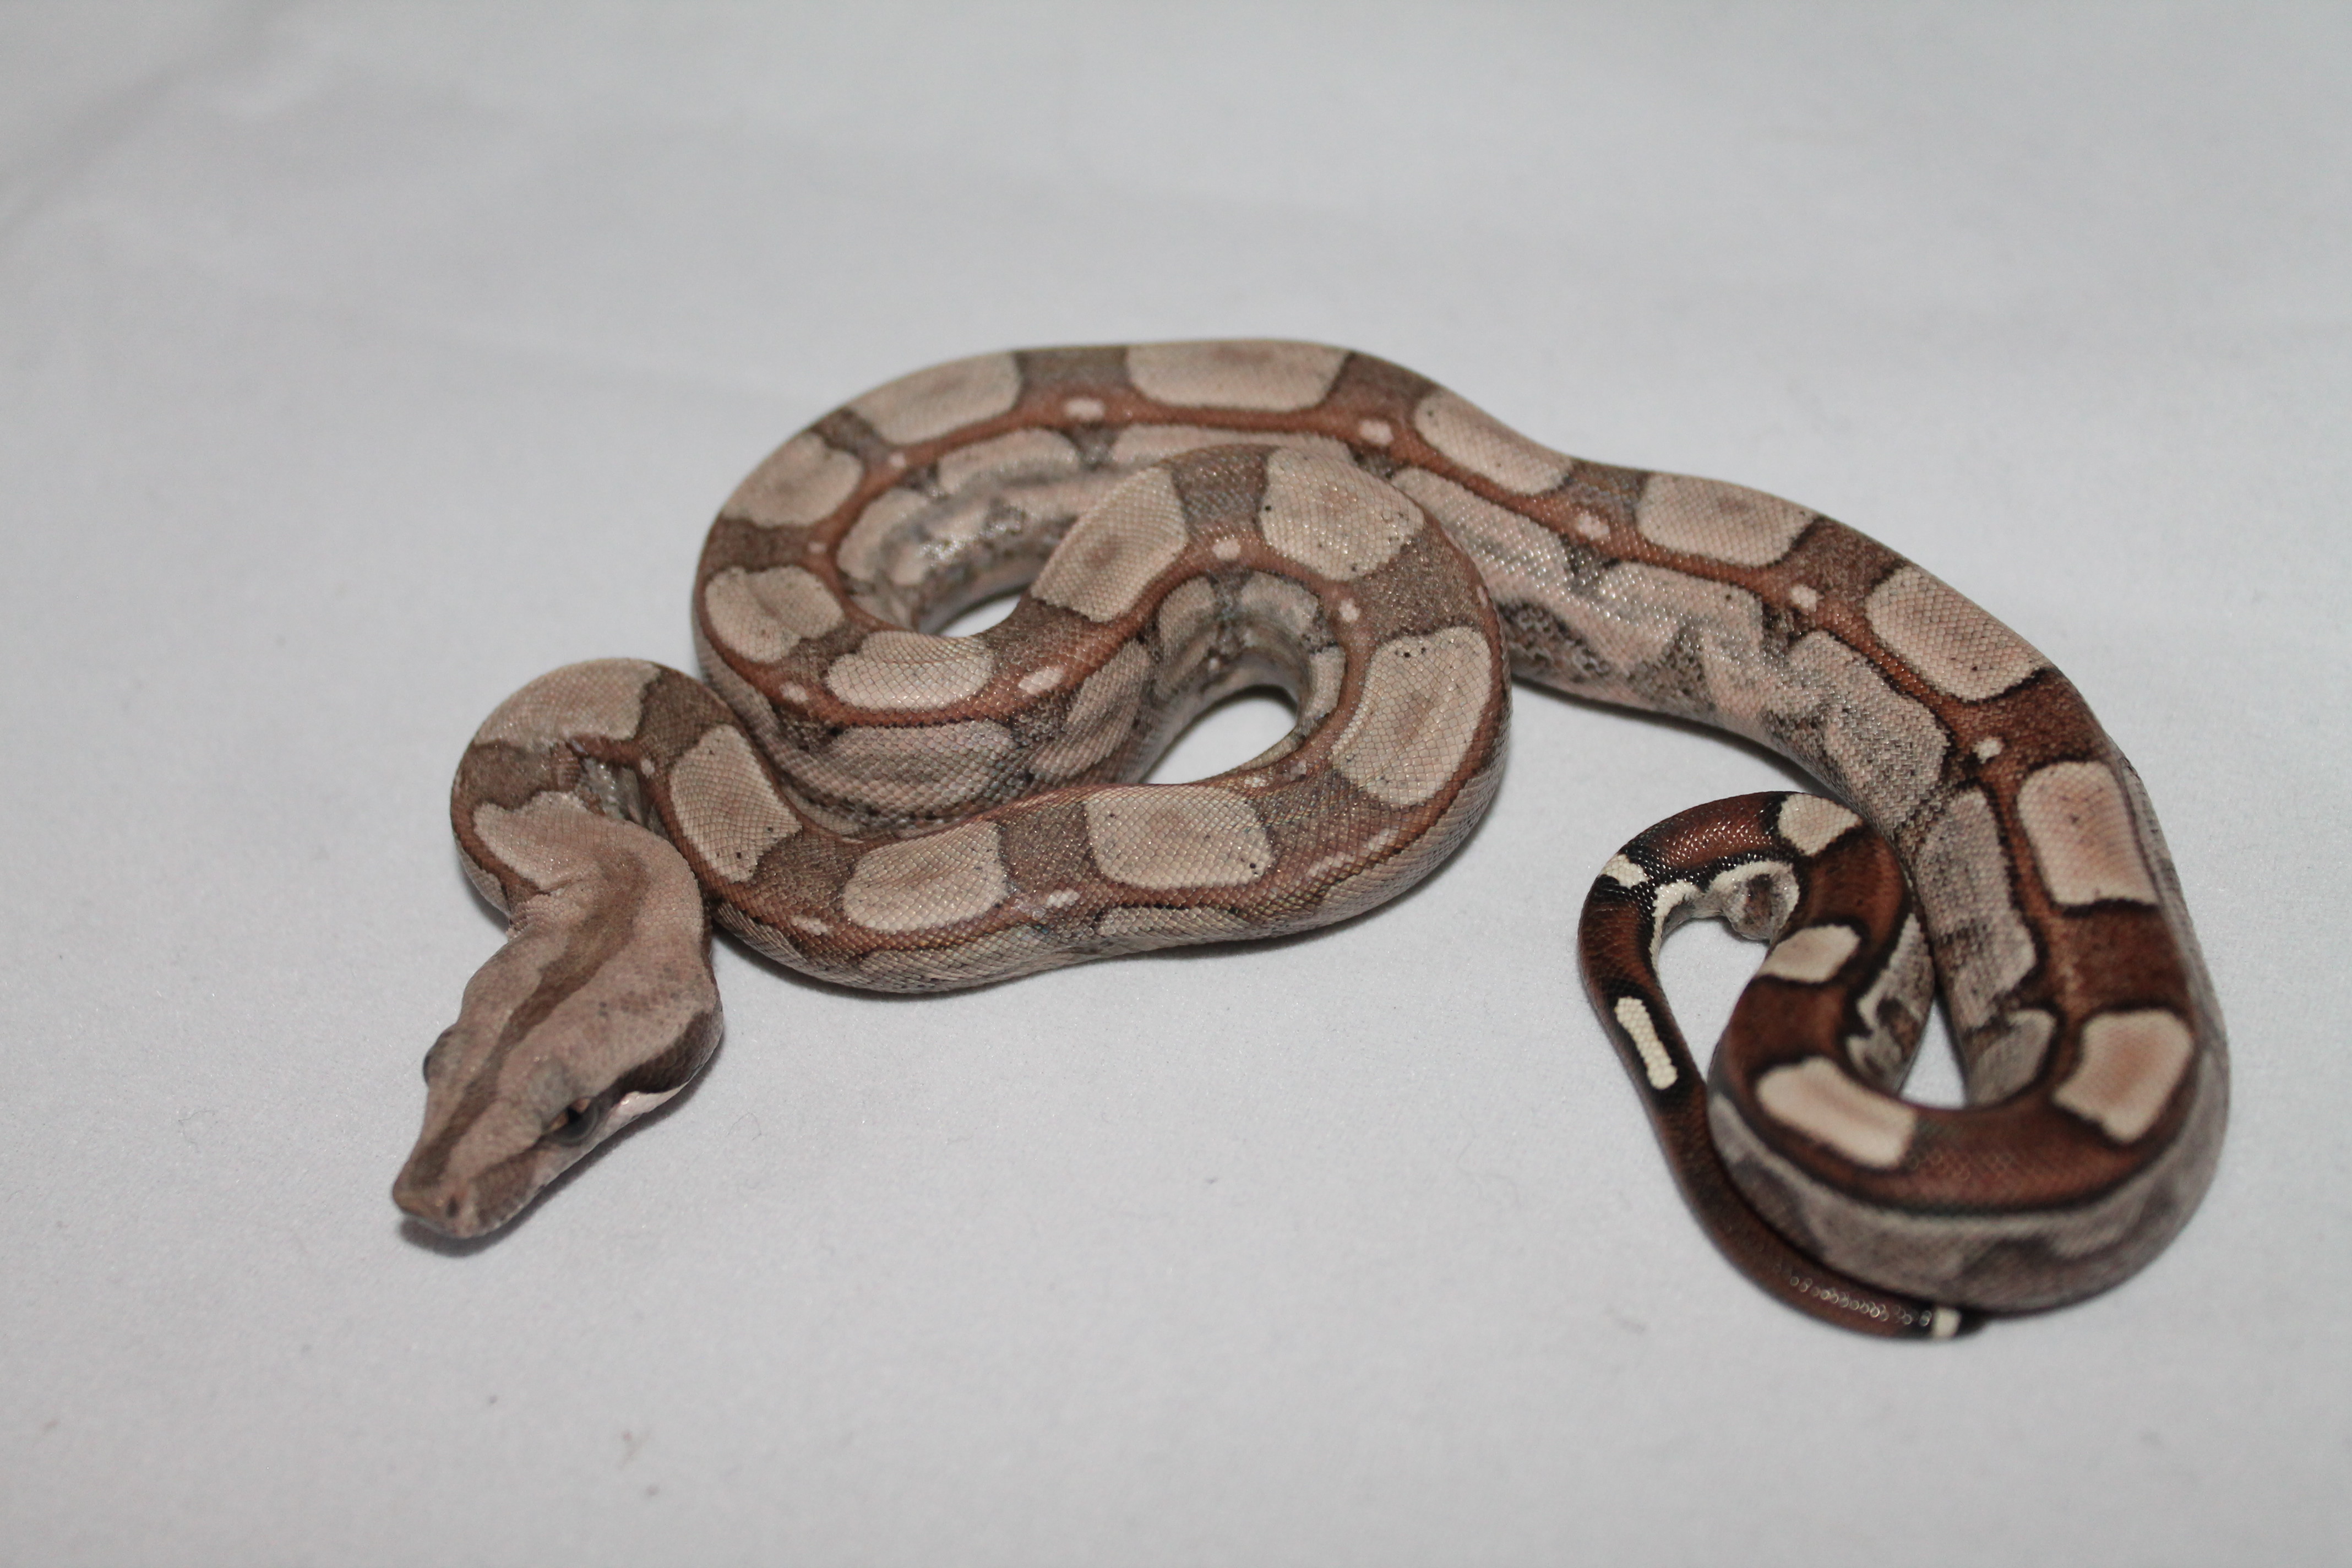 Key West Boa Constrictor by 1st Choice Boas